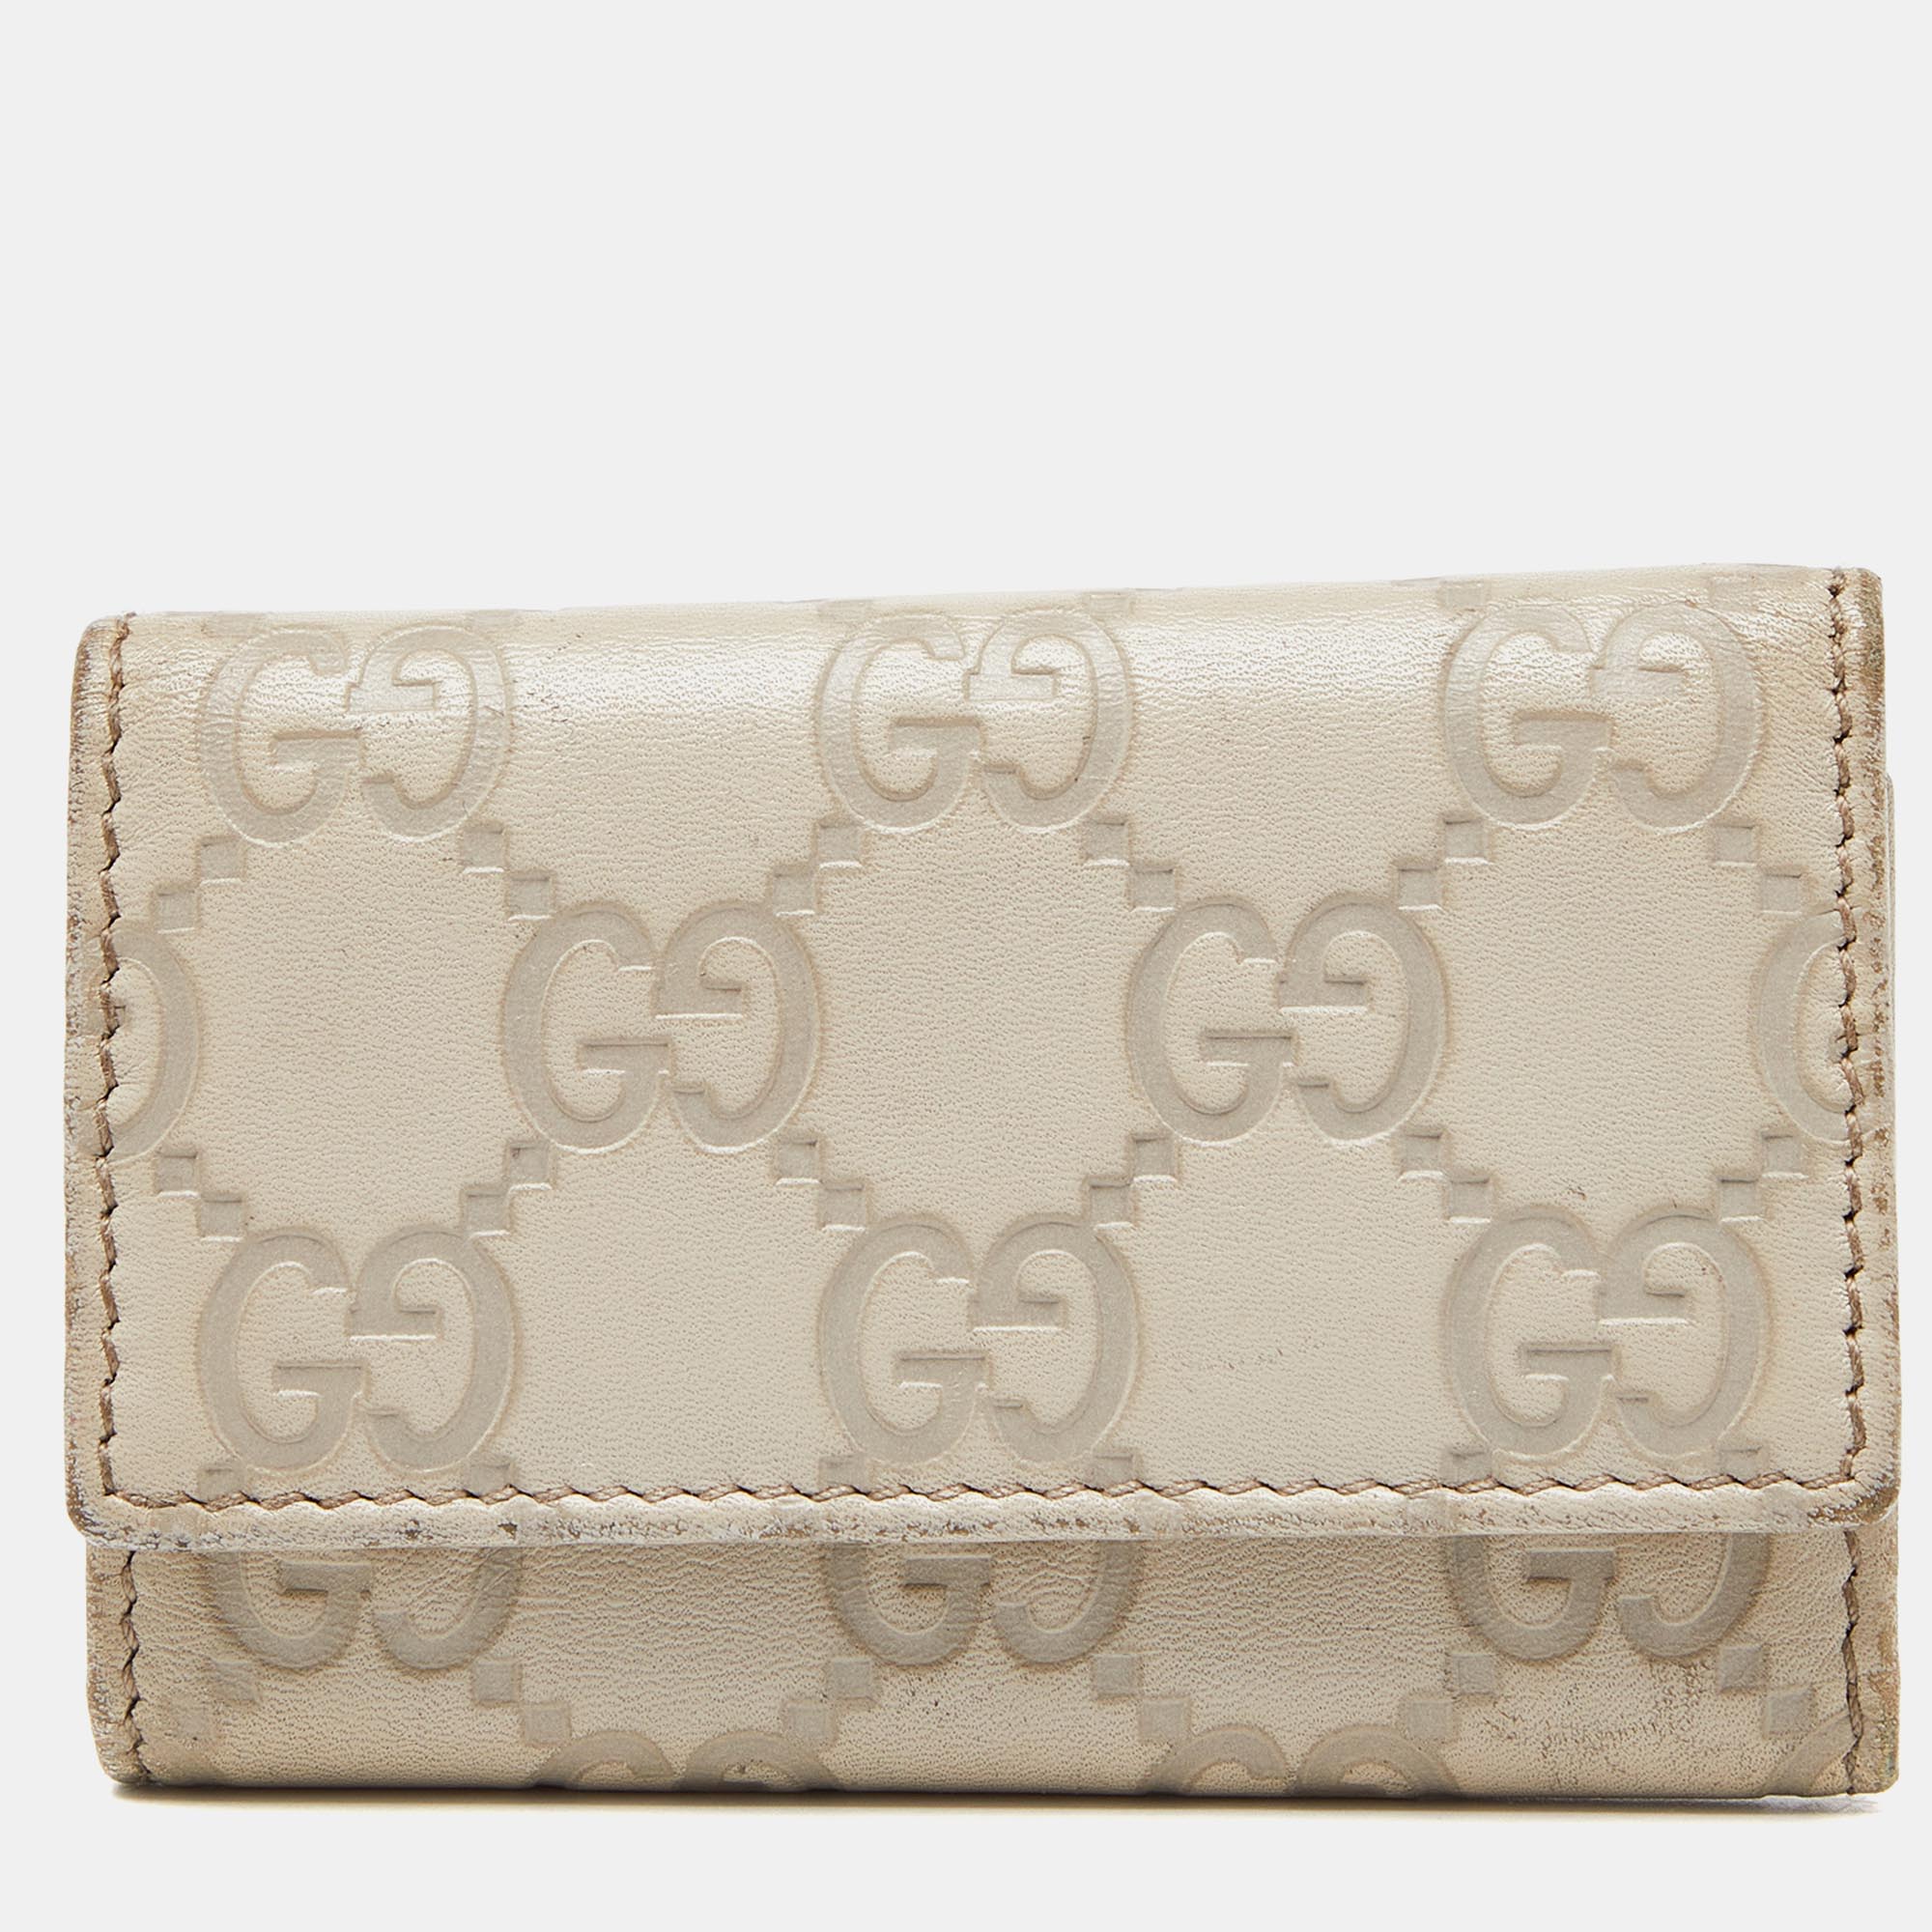 Gucci beige guccissima leather bow 6 key holder